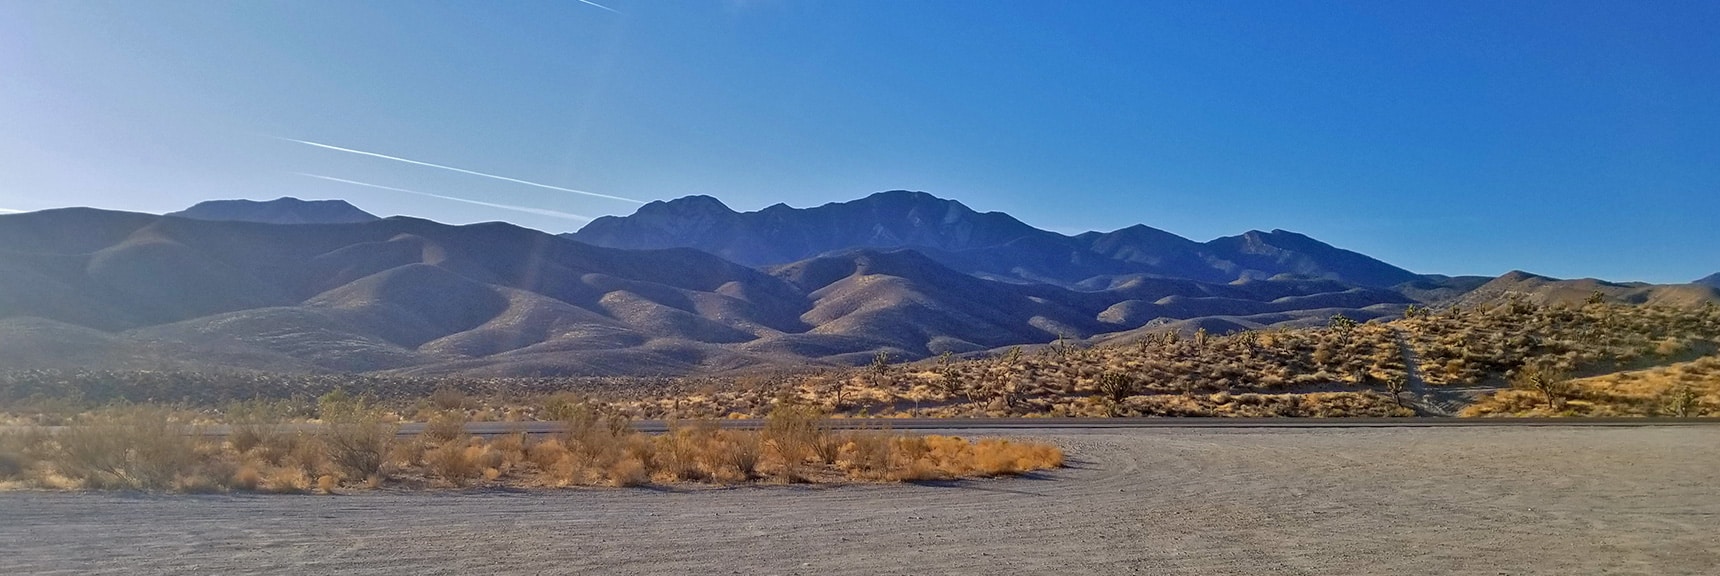 La Madre Mountain Viewed from Lower Harris Springs Rd Parking Area | Harris Springs Rd, Harris Mountain Rd | Spring Mountains Wilderness, Nevada